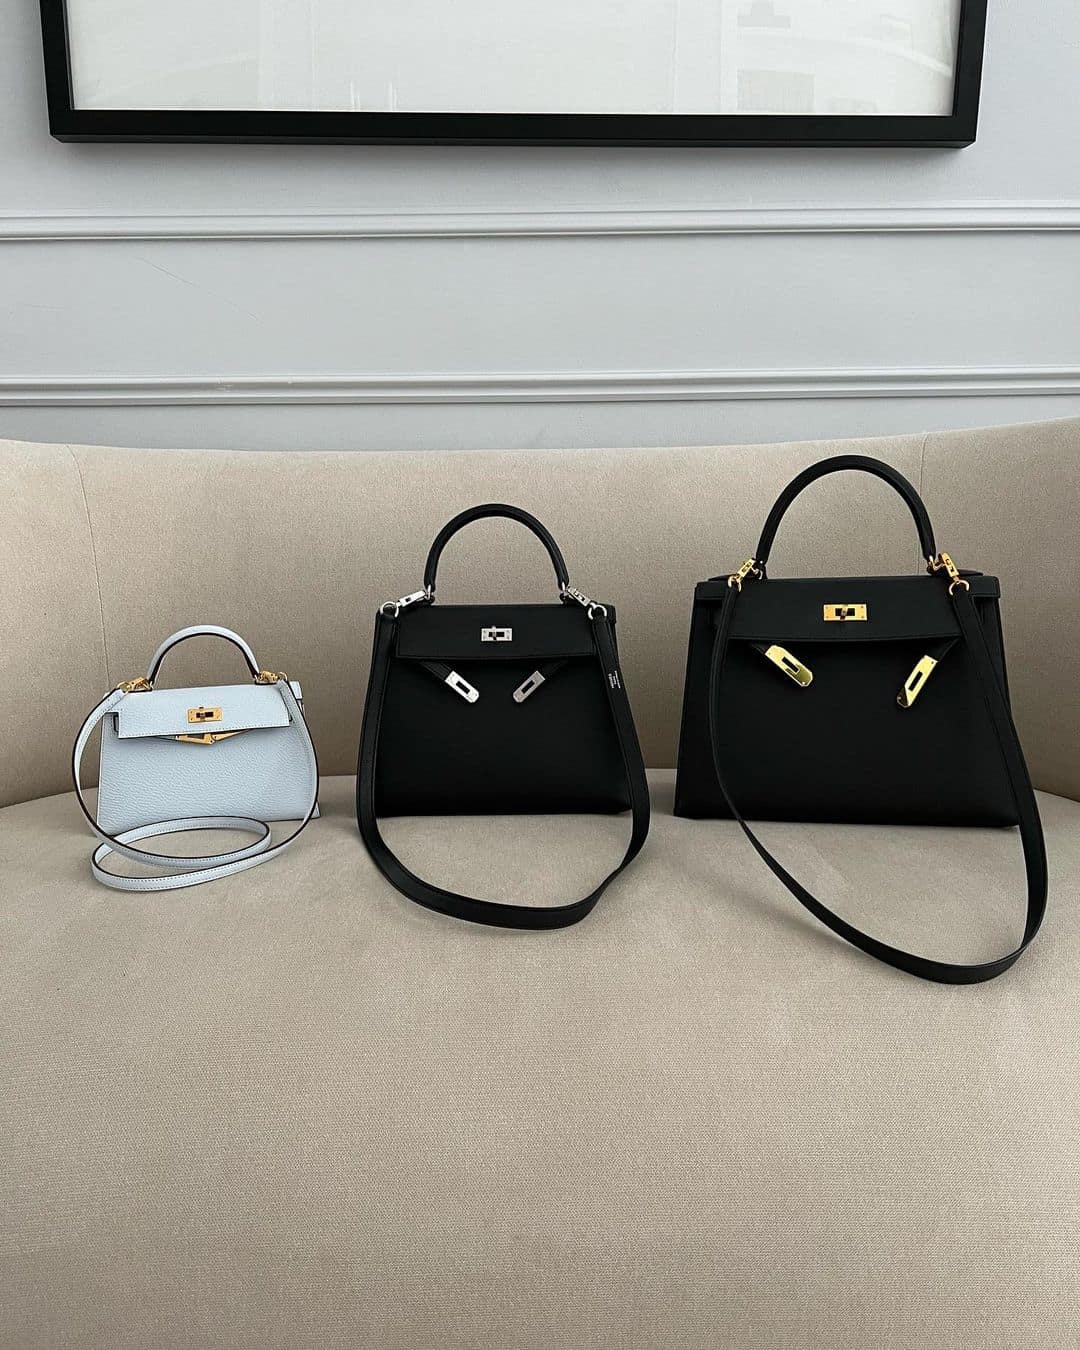 Hermes Kelly bags sizing and pricing